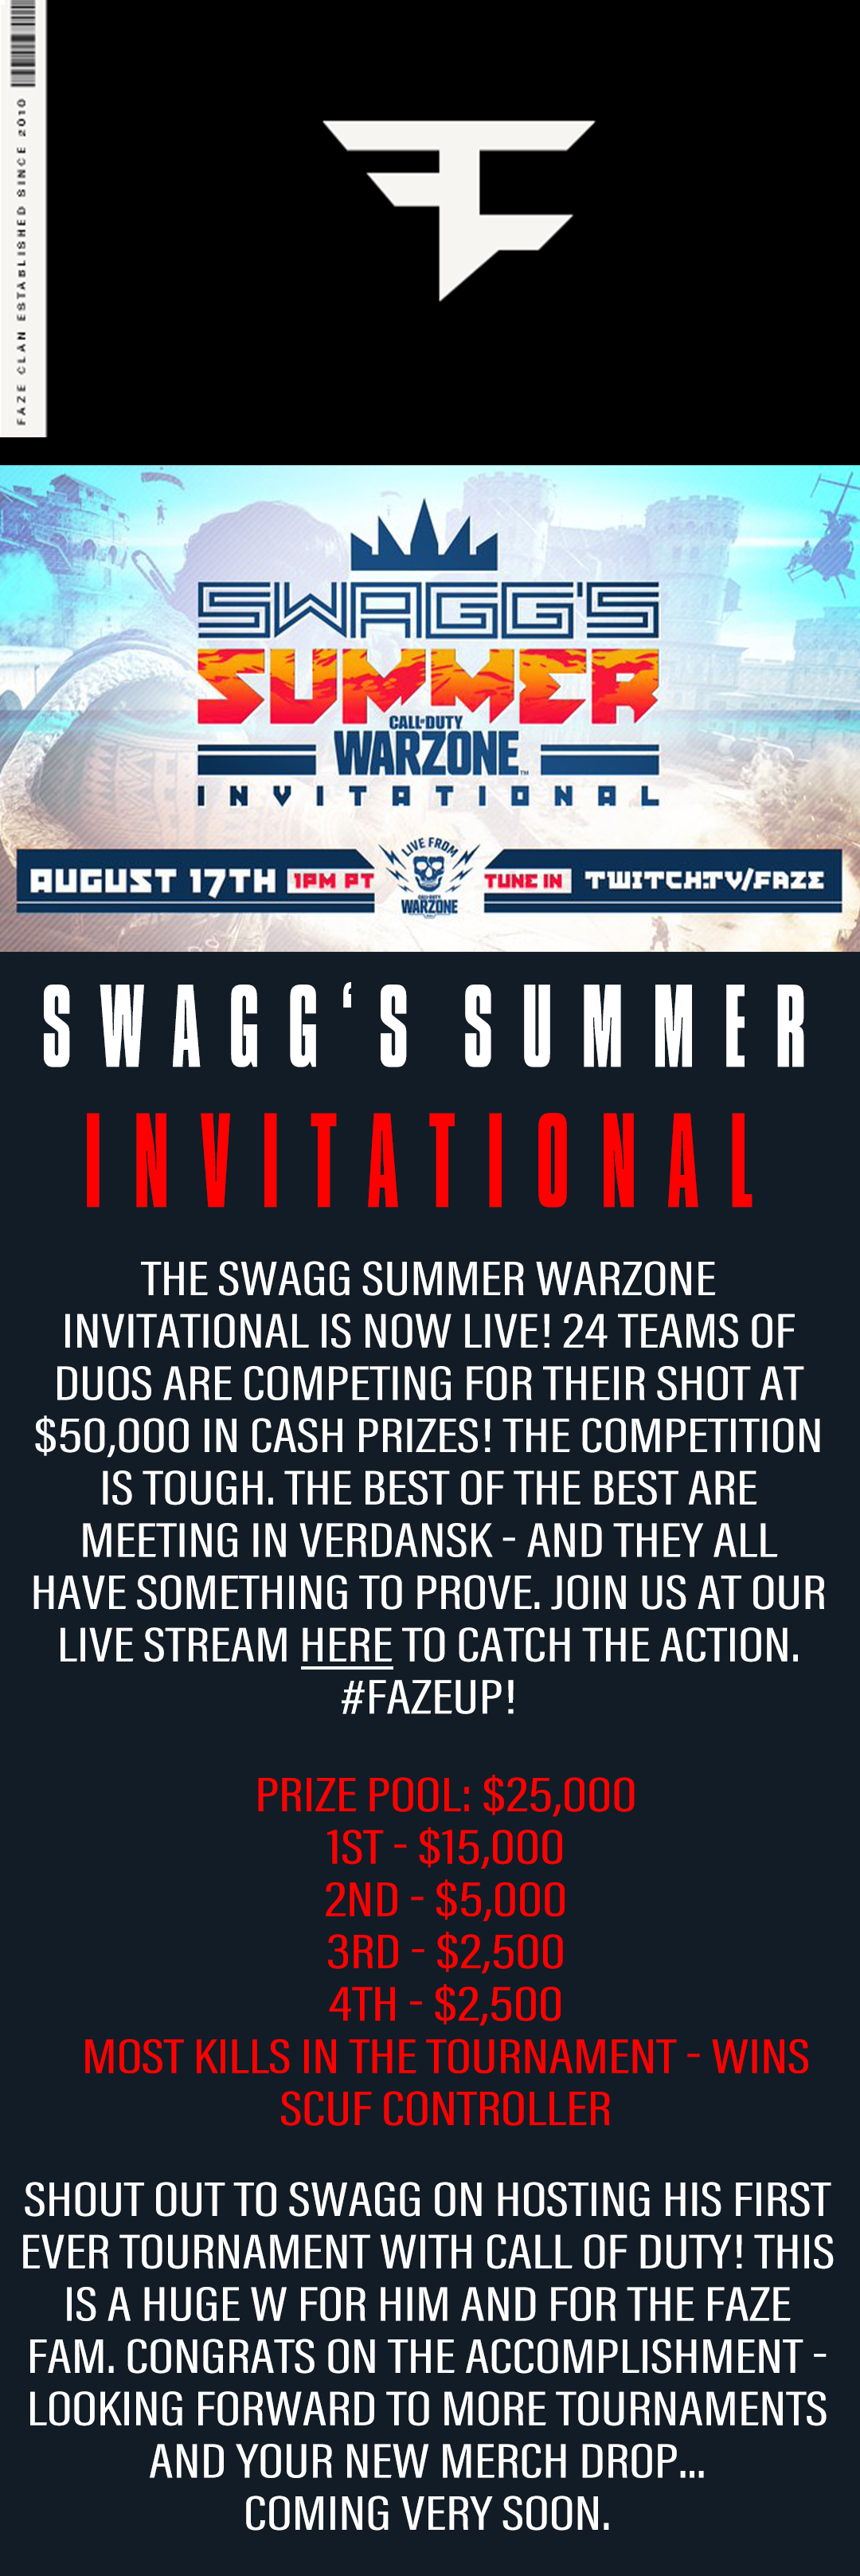 Swagg''s Summer Invitational